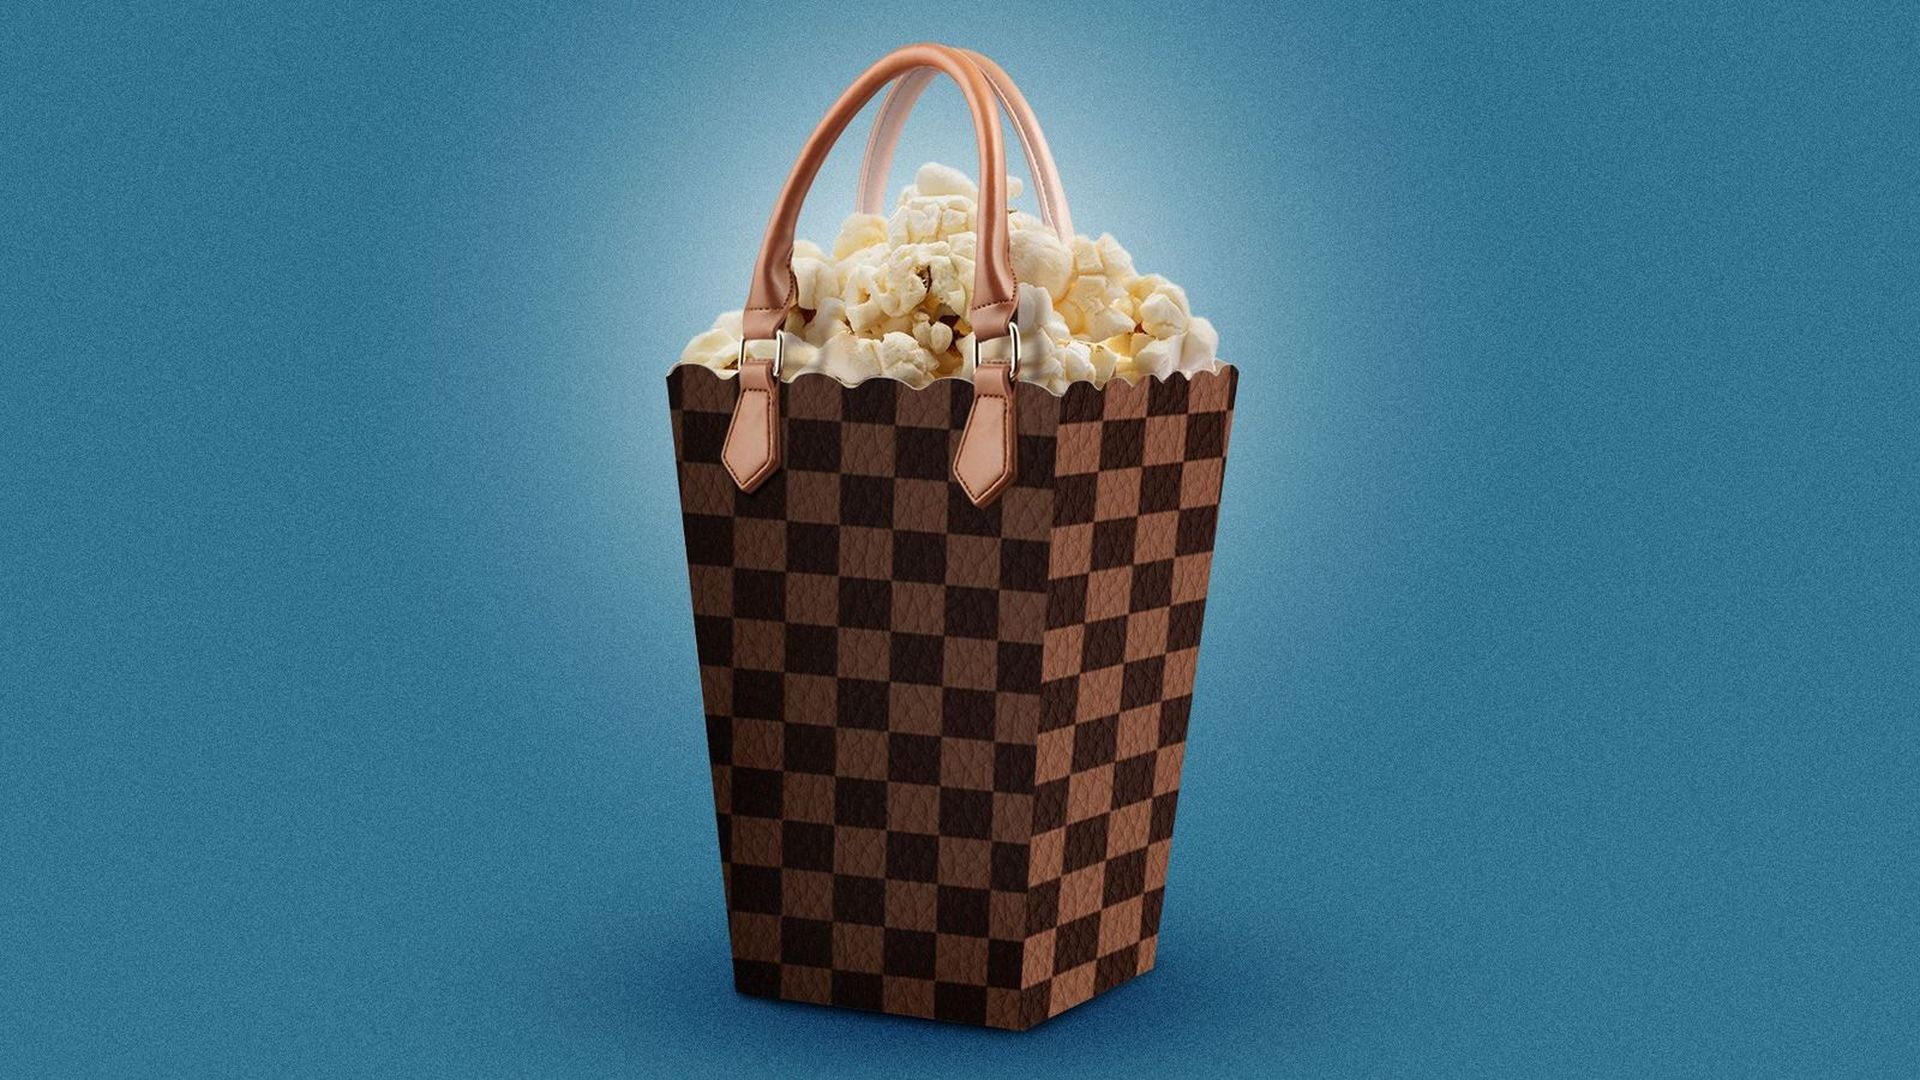 illustration of a popcorn basket in the shape of a Louis Vuitton bag